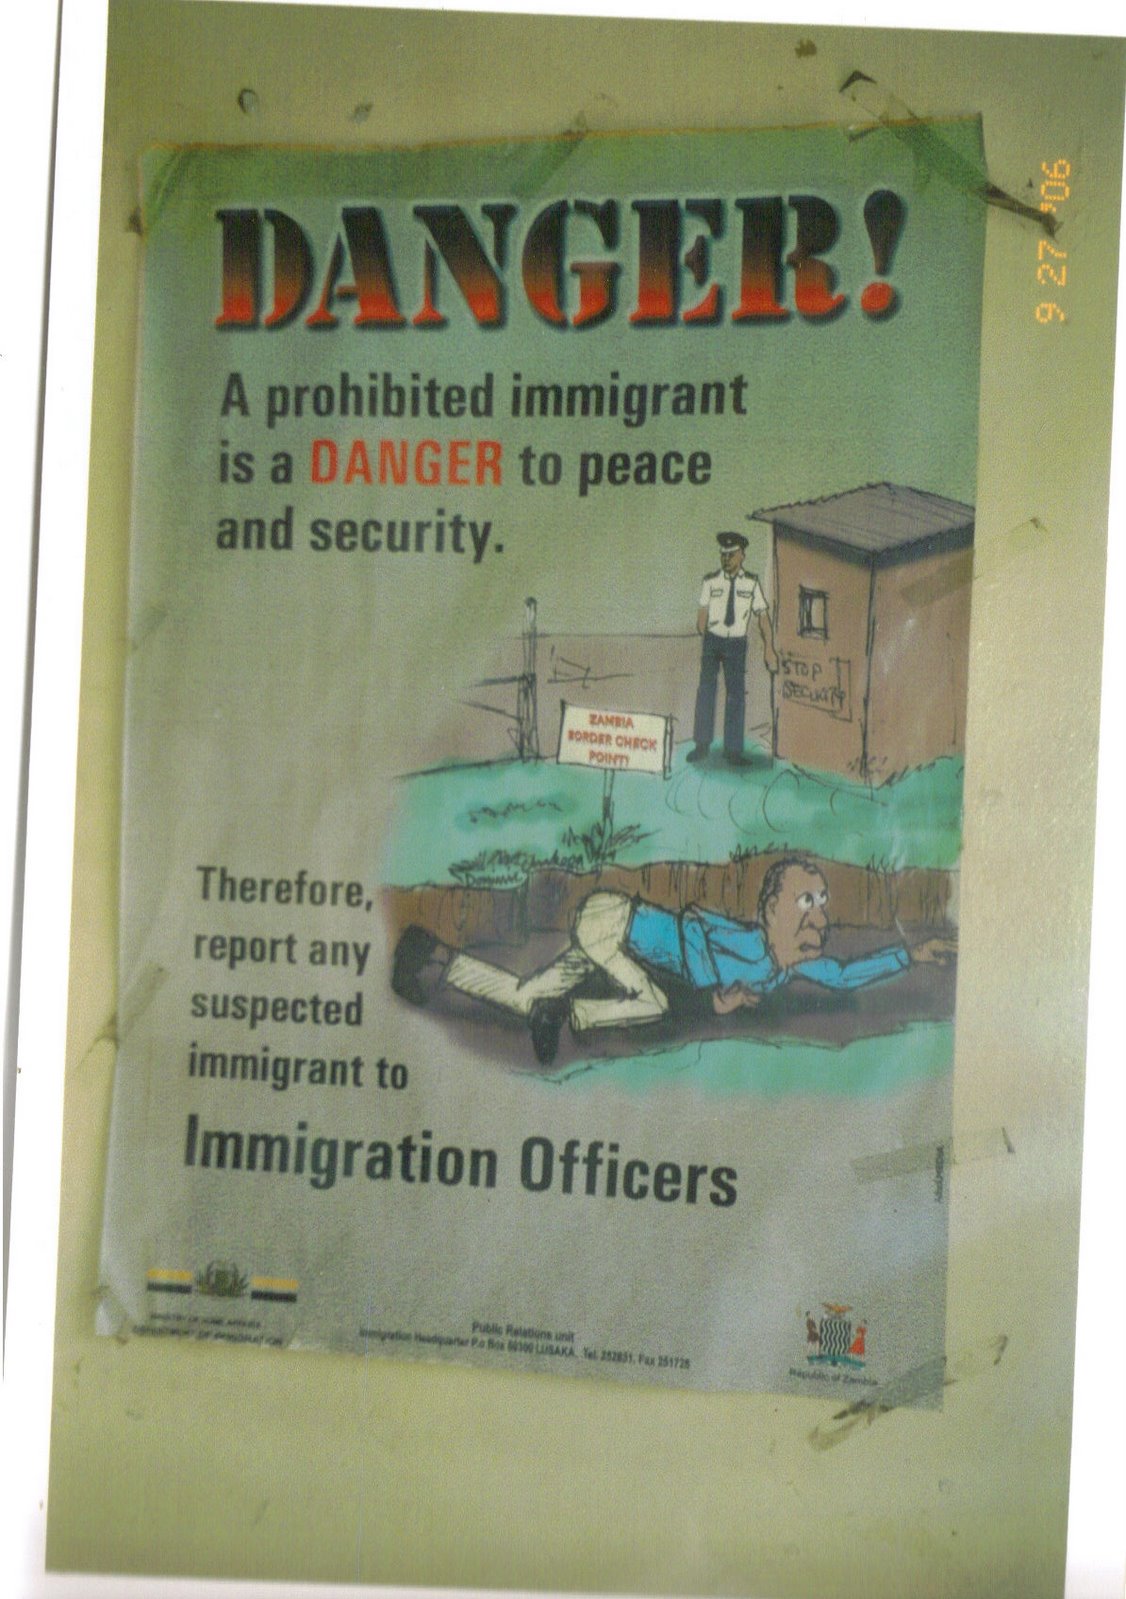 [Zambia+Immigration+Poster.JPG]